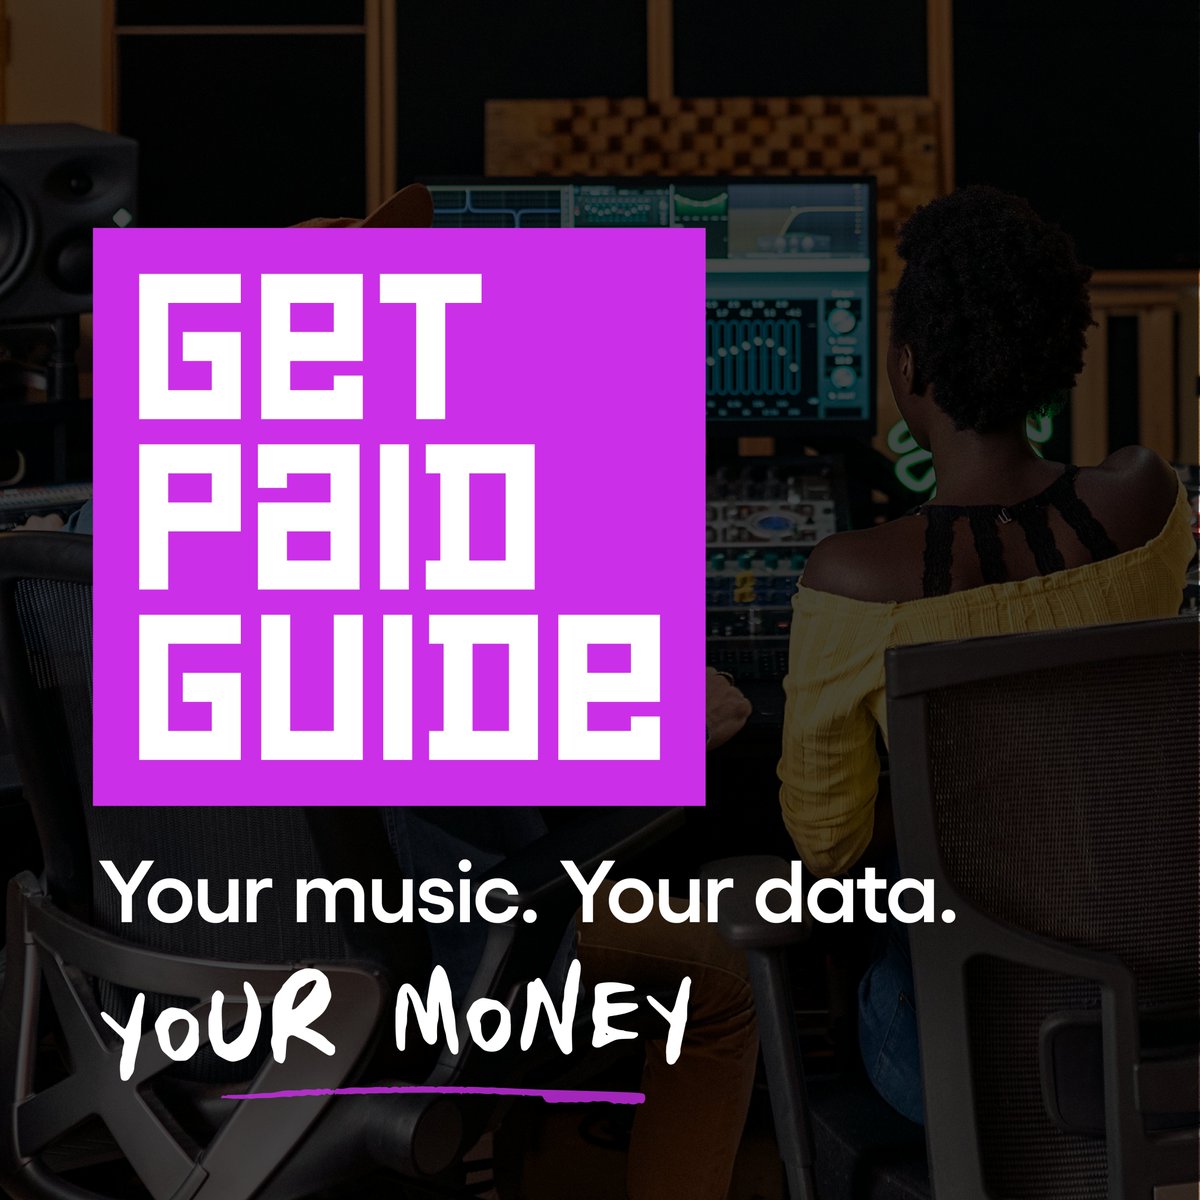 Today, alongside the @The_IPO and @PRSforMusic, we’ve unveiled a new Get Paid Guide to help demystify music metadata for music creators, which you can find here 👉getpaidguide.co.uk 🎼 Further info here: ppluk.com/all-you-need-t…